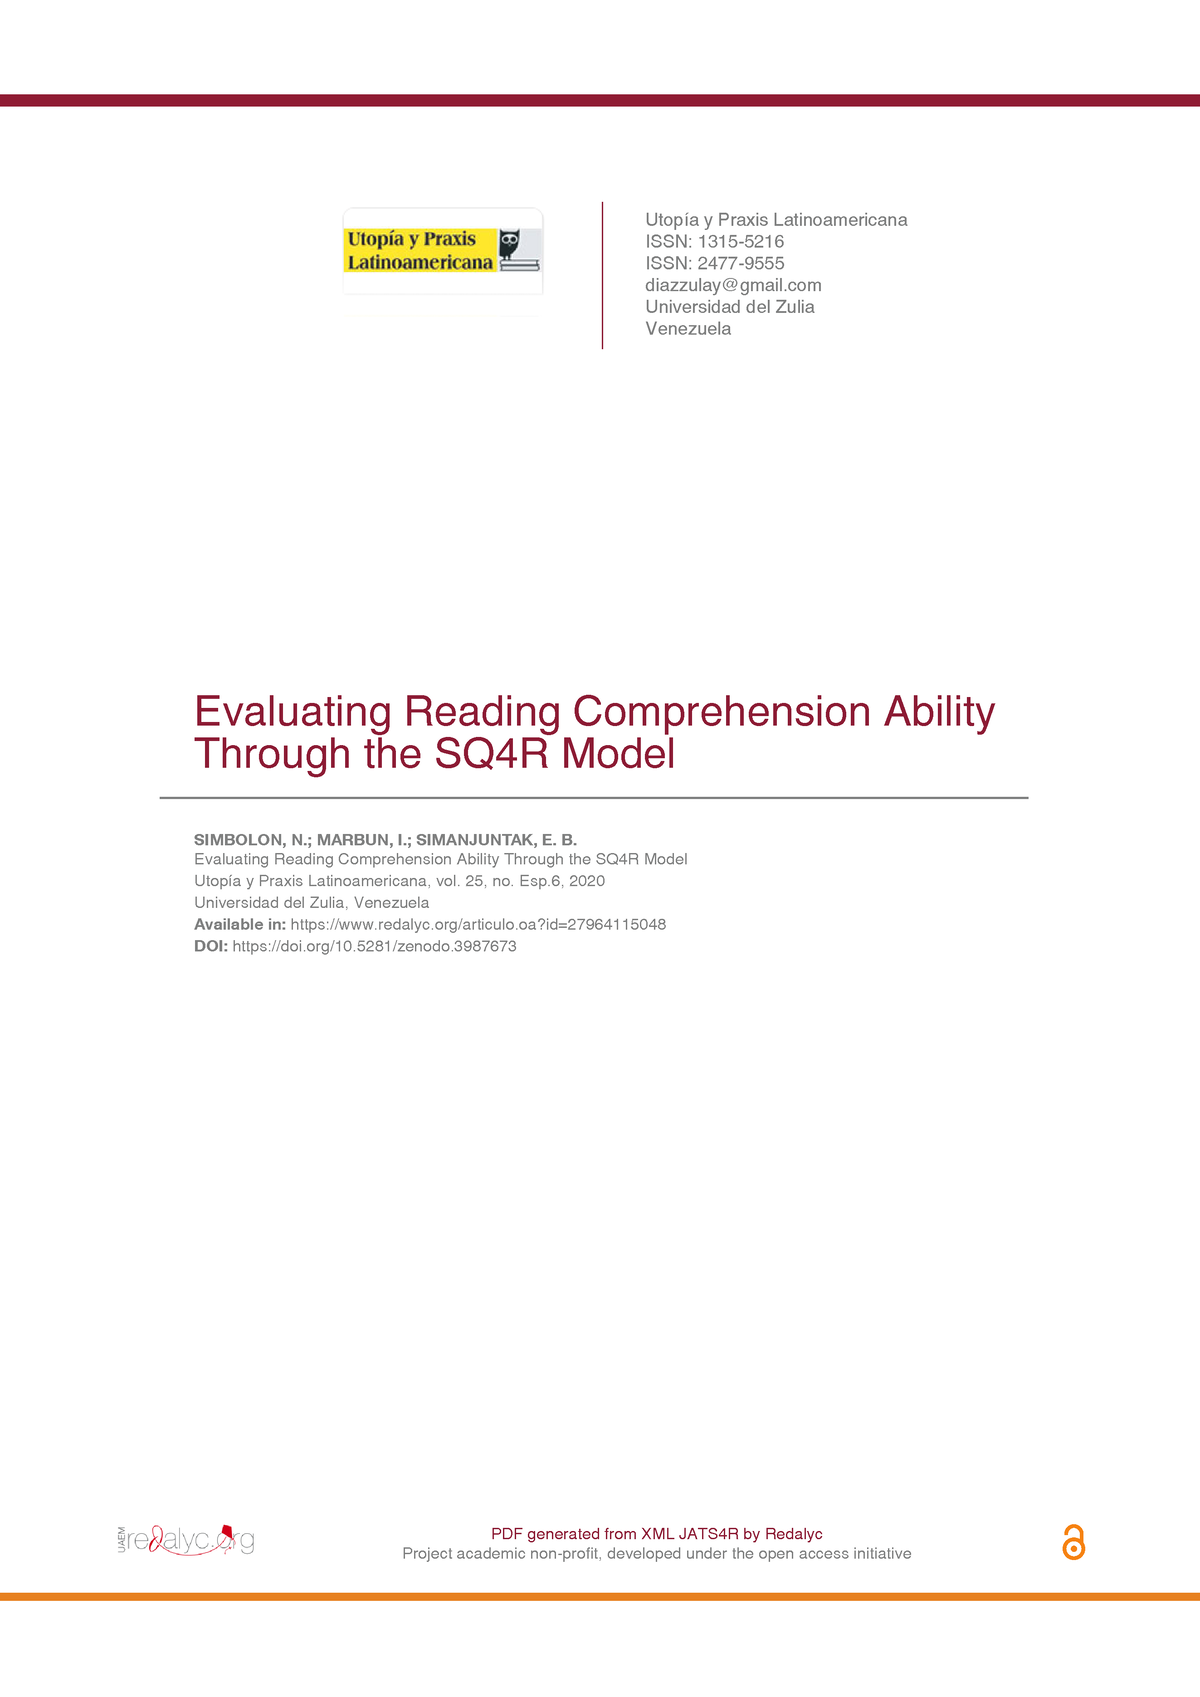 27964115048 - Evaluating Reading Comprehension Ability Through the SQ4R ...